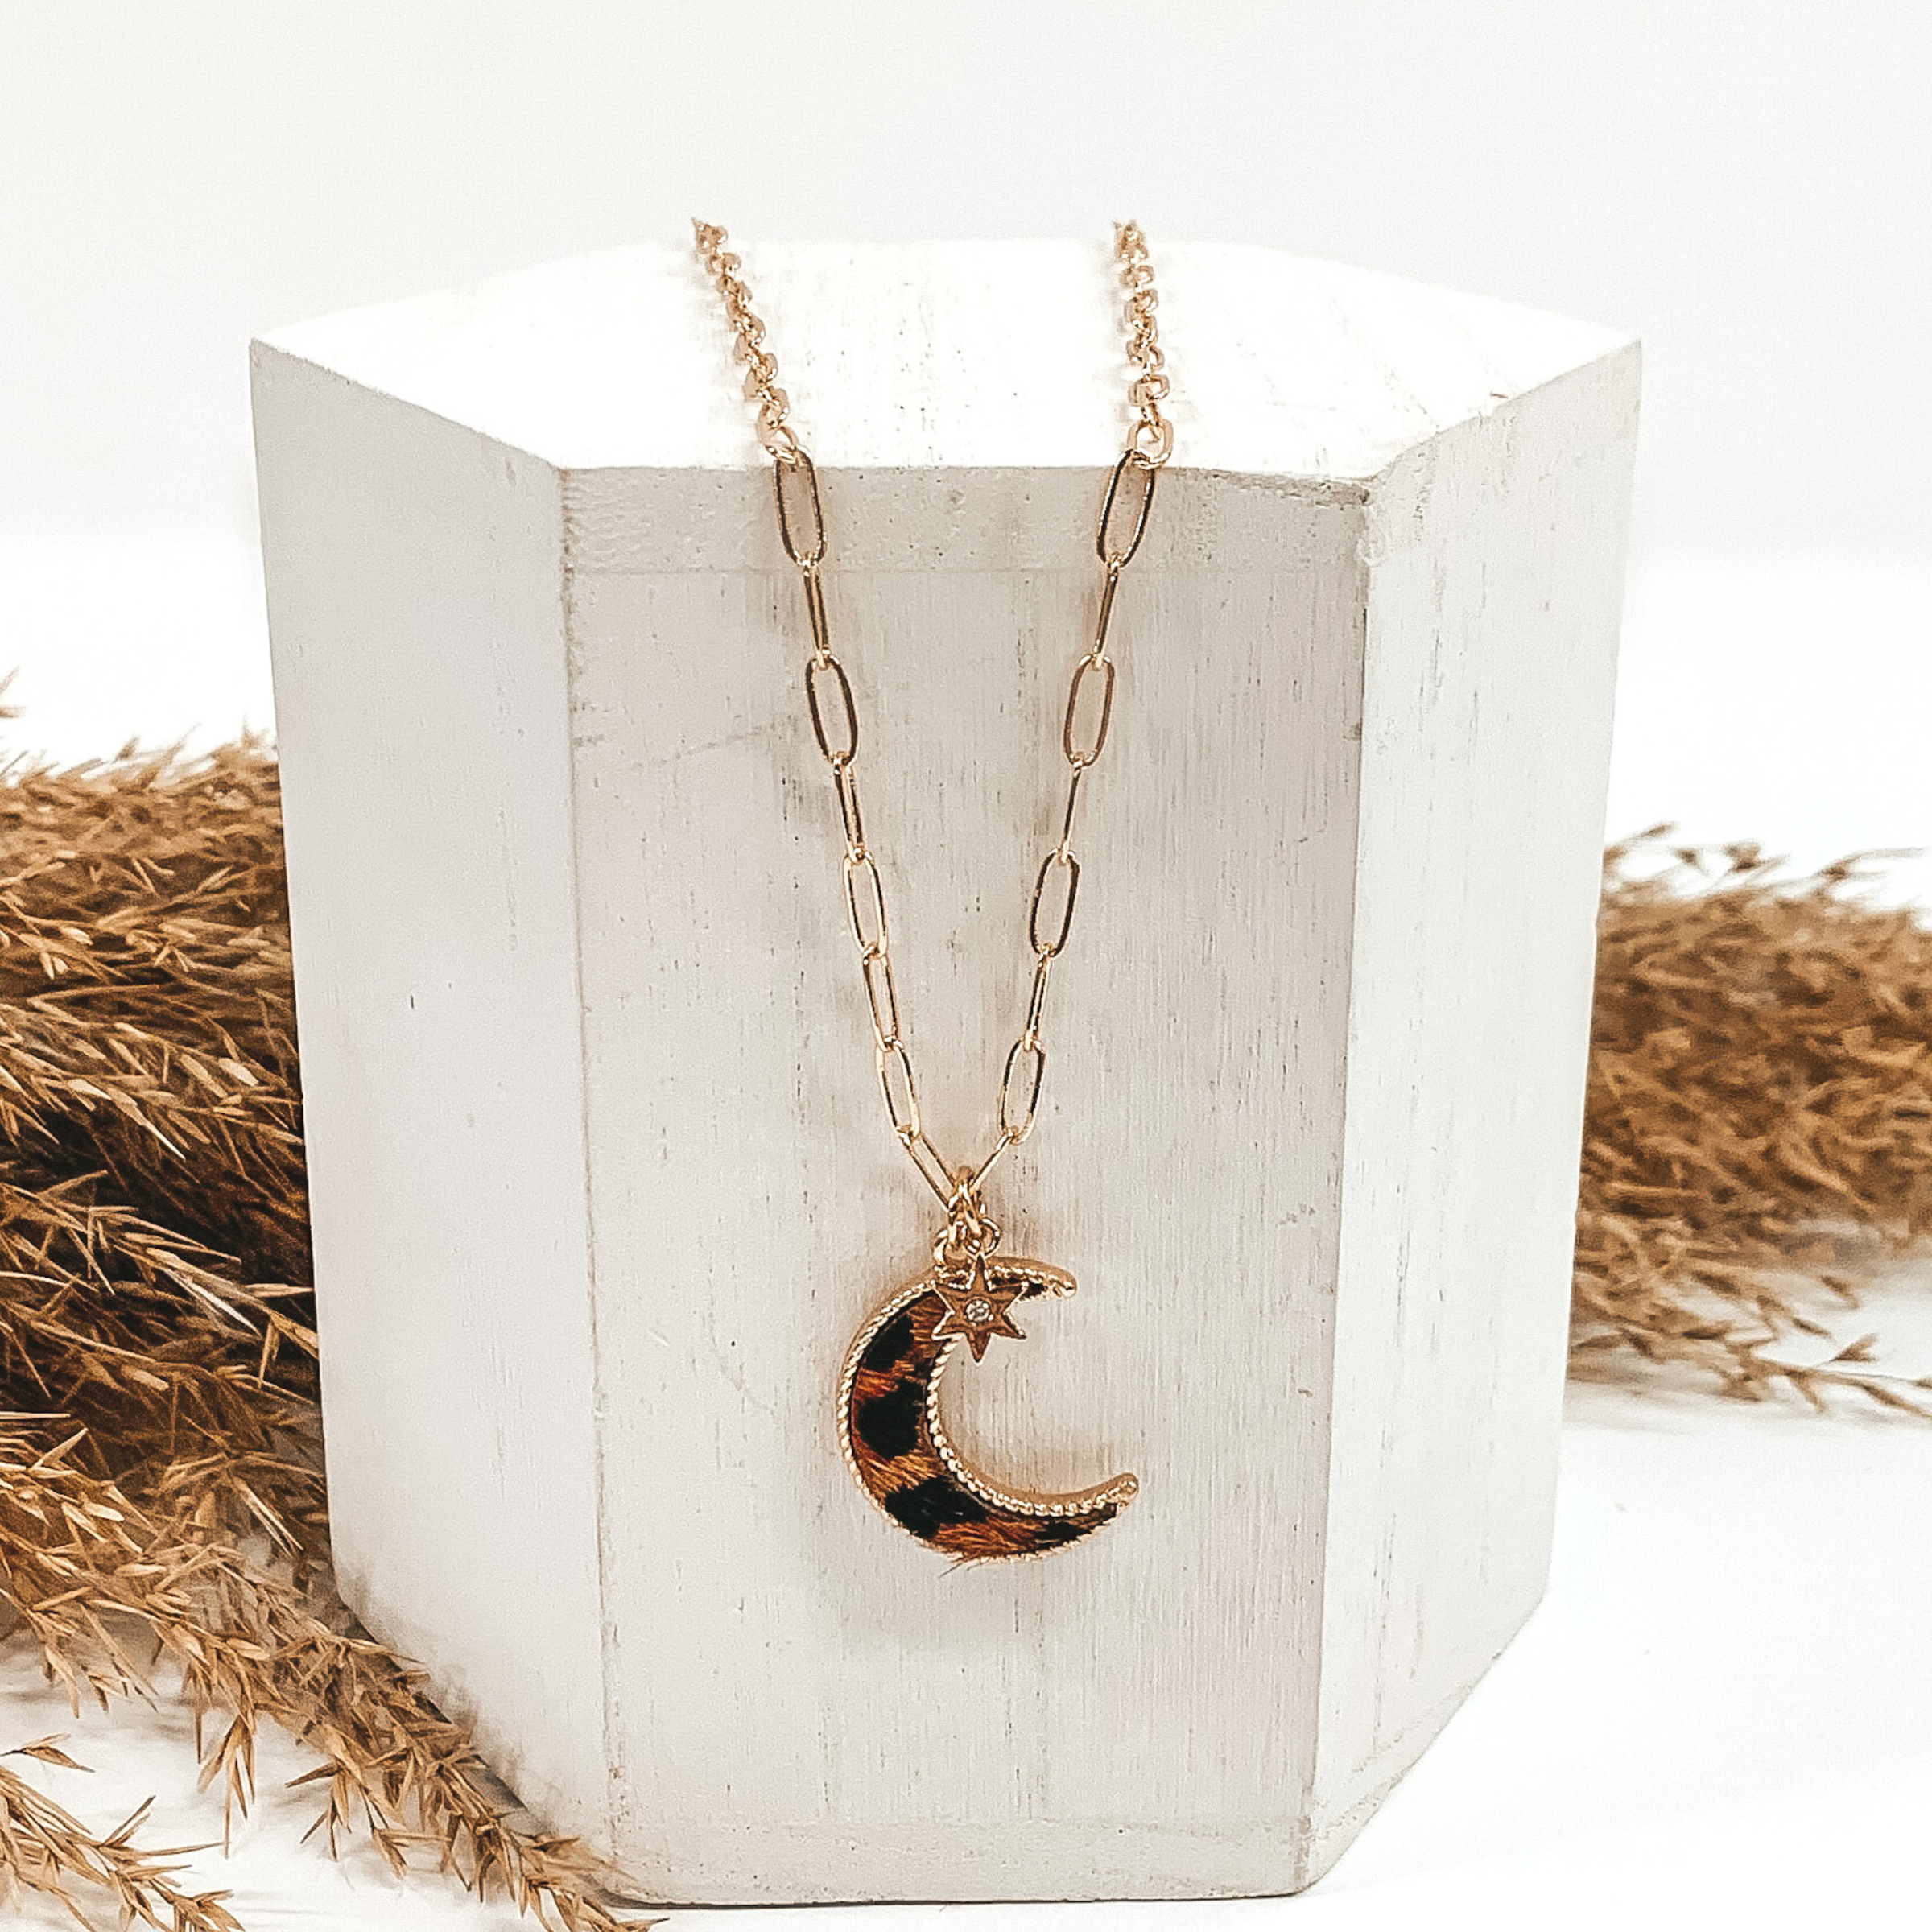 Gold paperclip chain with octagon pendant. The pendant has a brown hide animal print inlay. This necklace is pictured laying on a white block with tan floral behind it. This is all pictured on a white background.